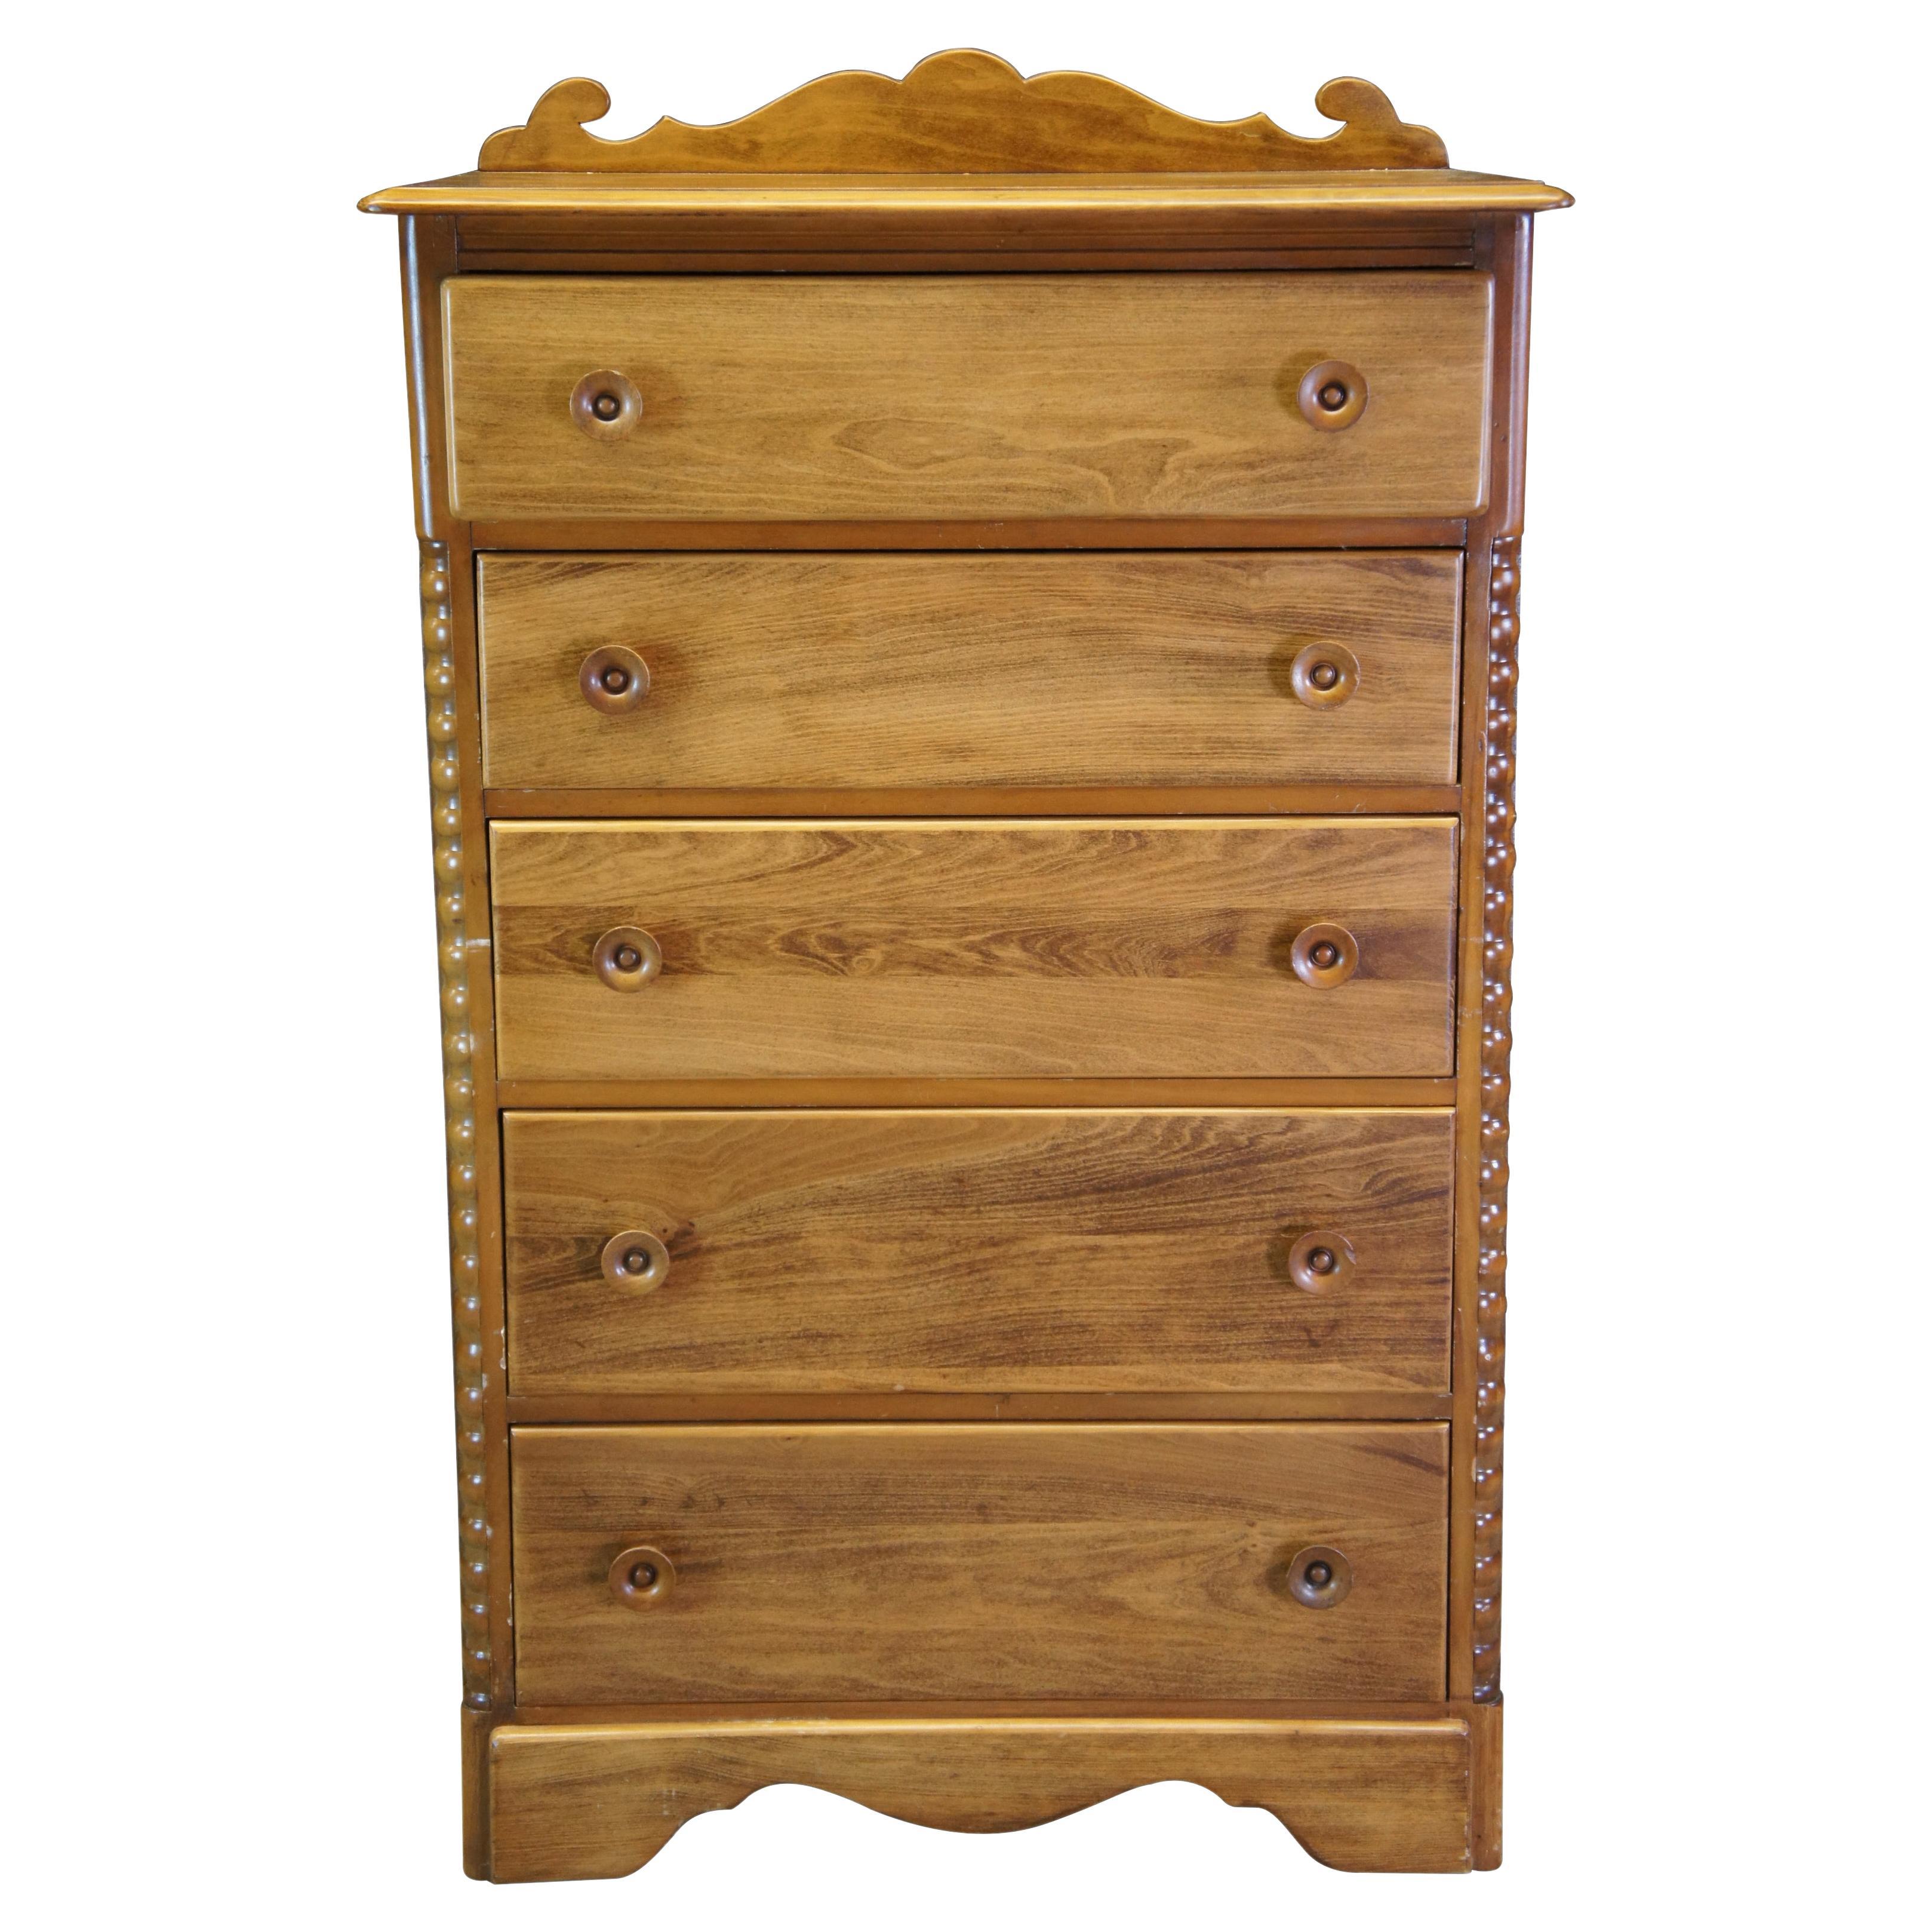 Early American Style American Country Oak 5 Drawer Chest Tallboy Dresser